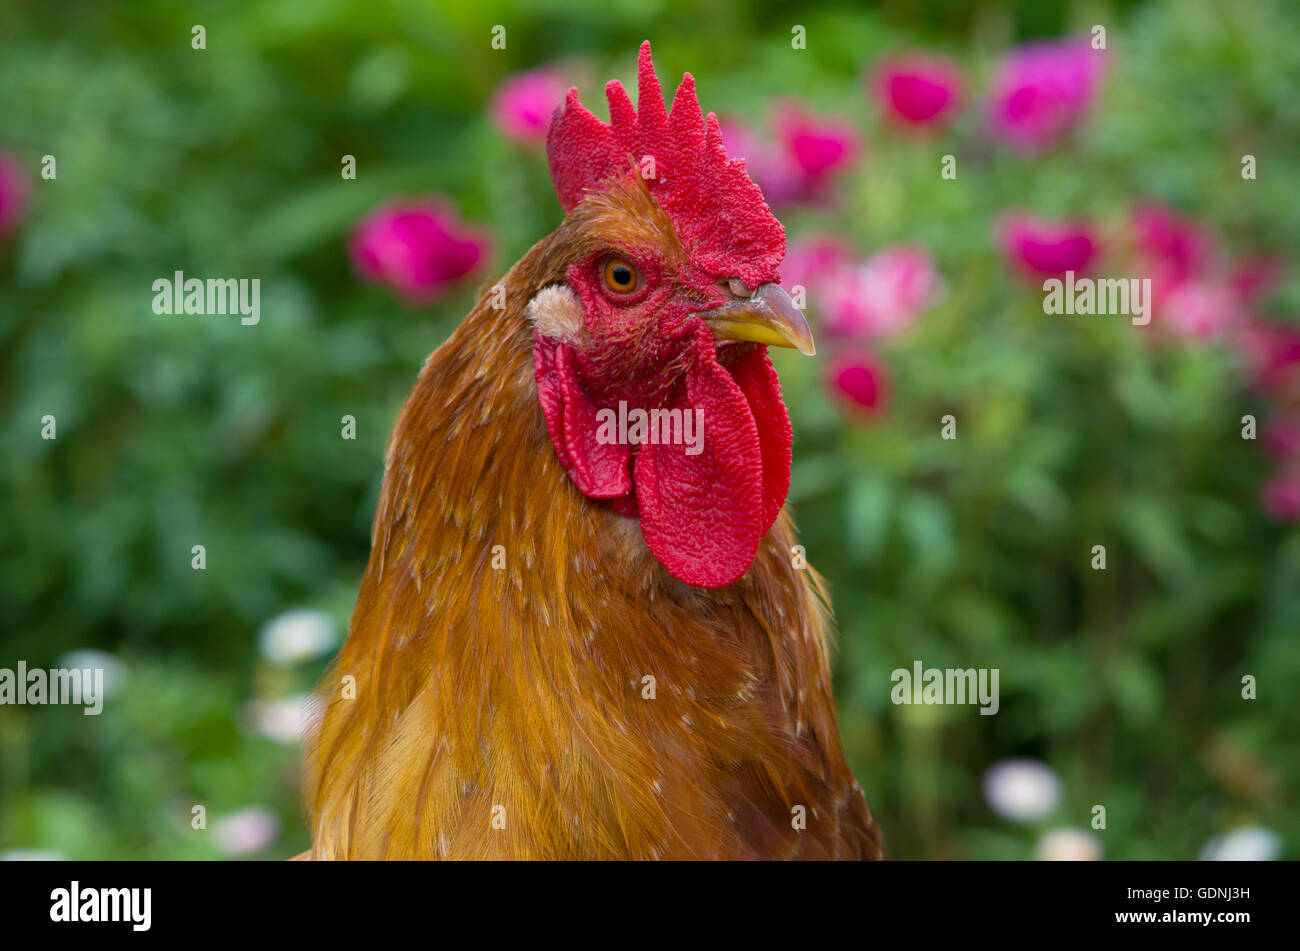 Poultry head of a rooster thoroughbred,bird, breed, economy, farmer, farming, house, portrait, poultry farming, rooster Stock Photo